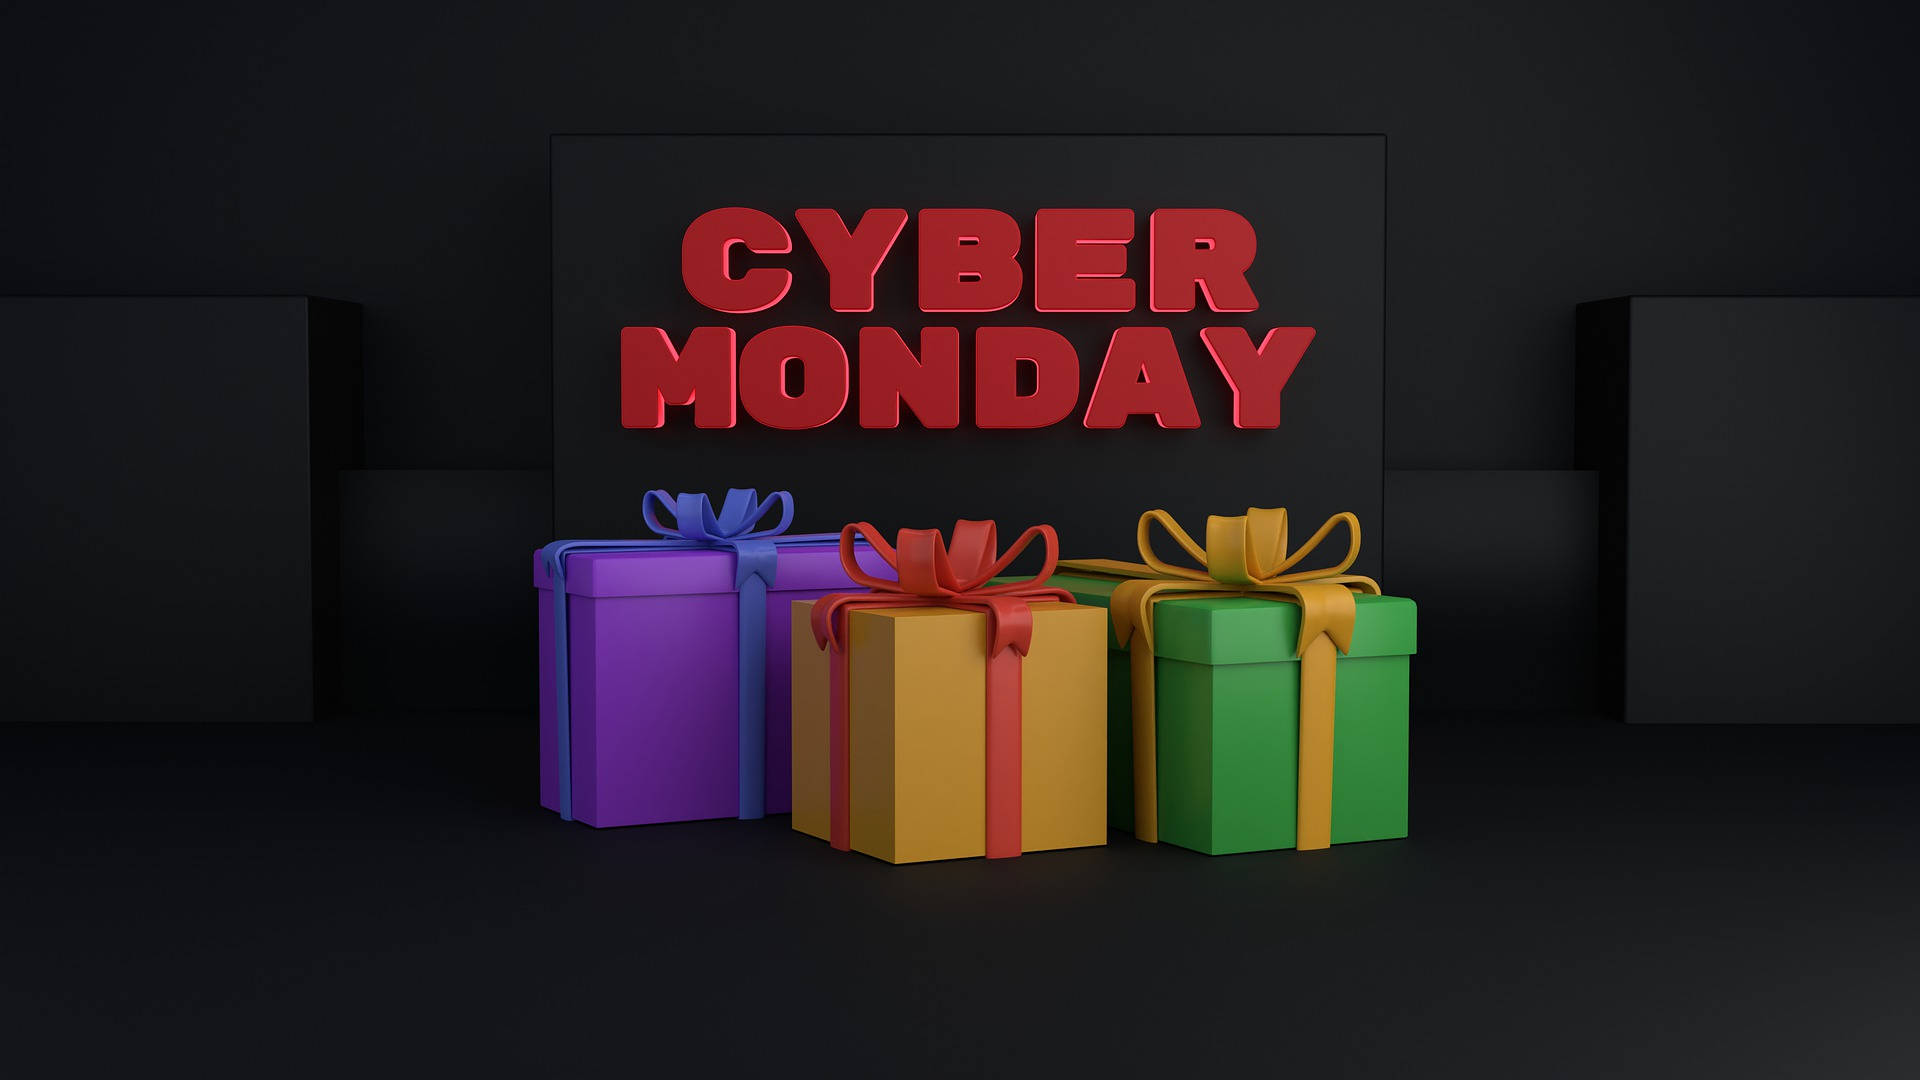 Cyber Monday Gifts And Presents